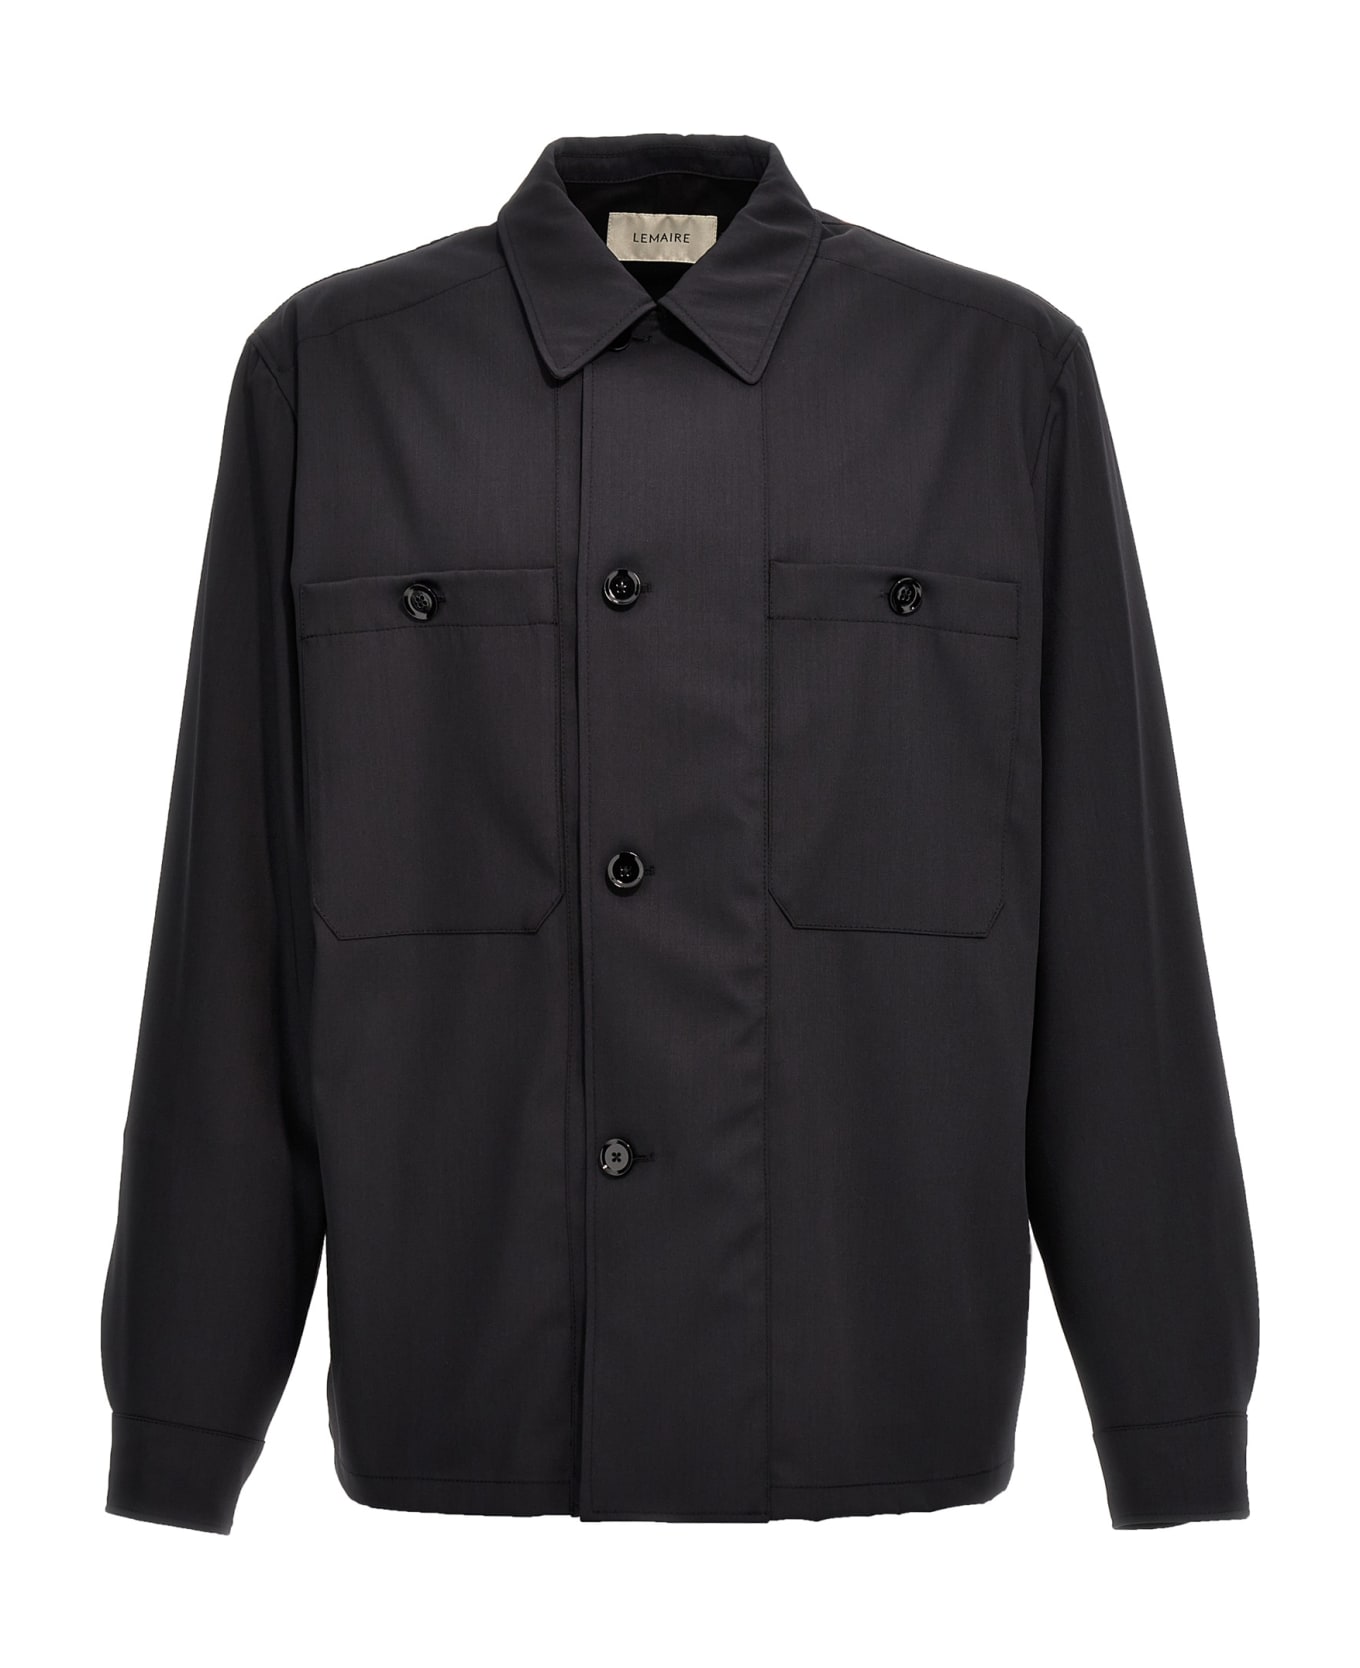 Lemaire Overshirt 'soft Military' - BLACK シャツ